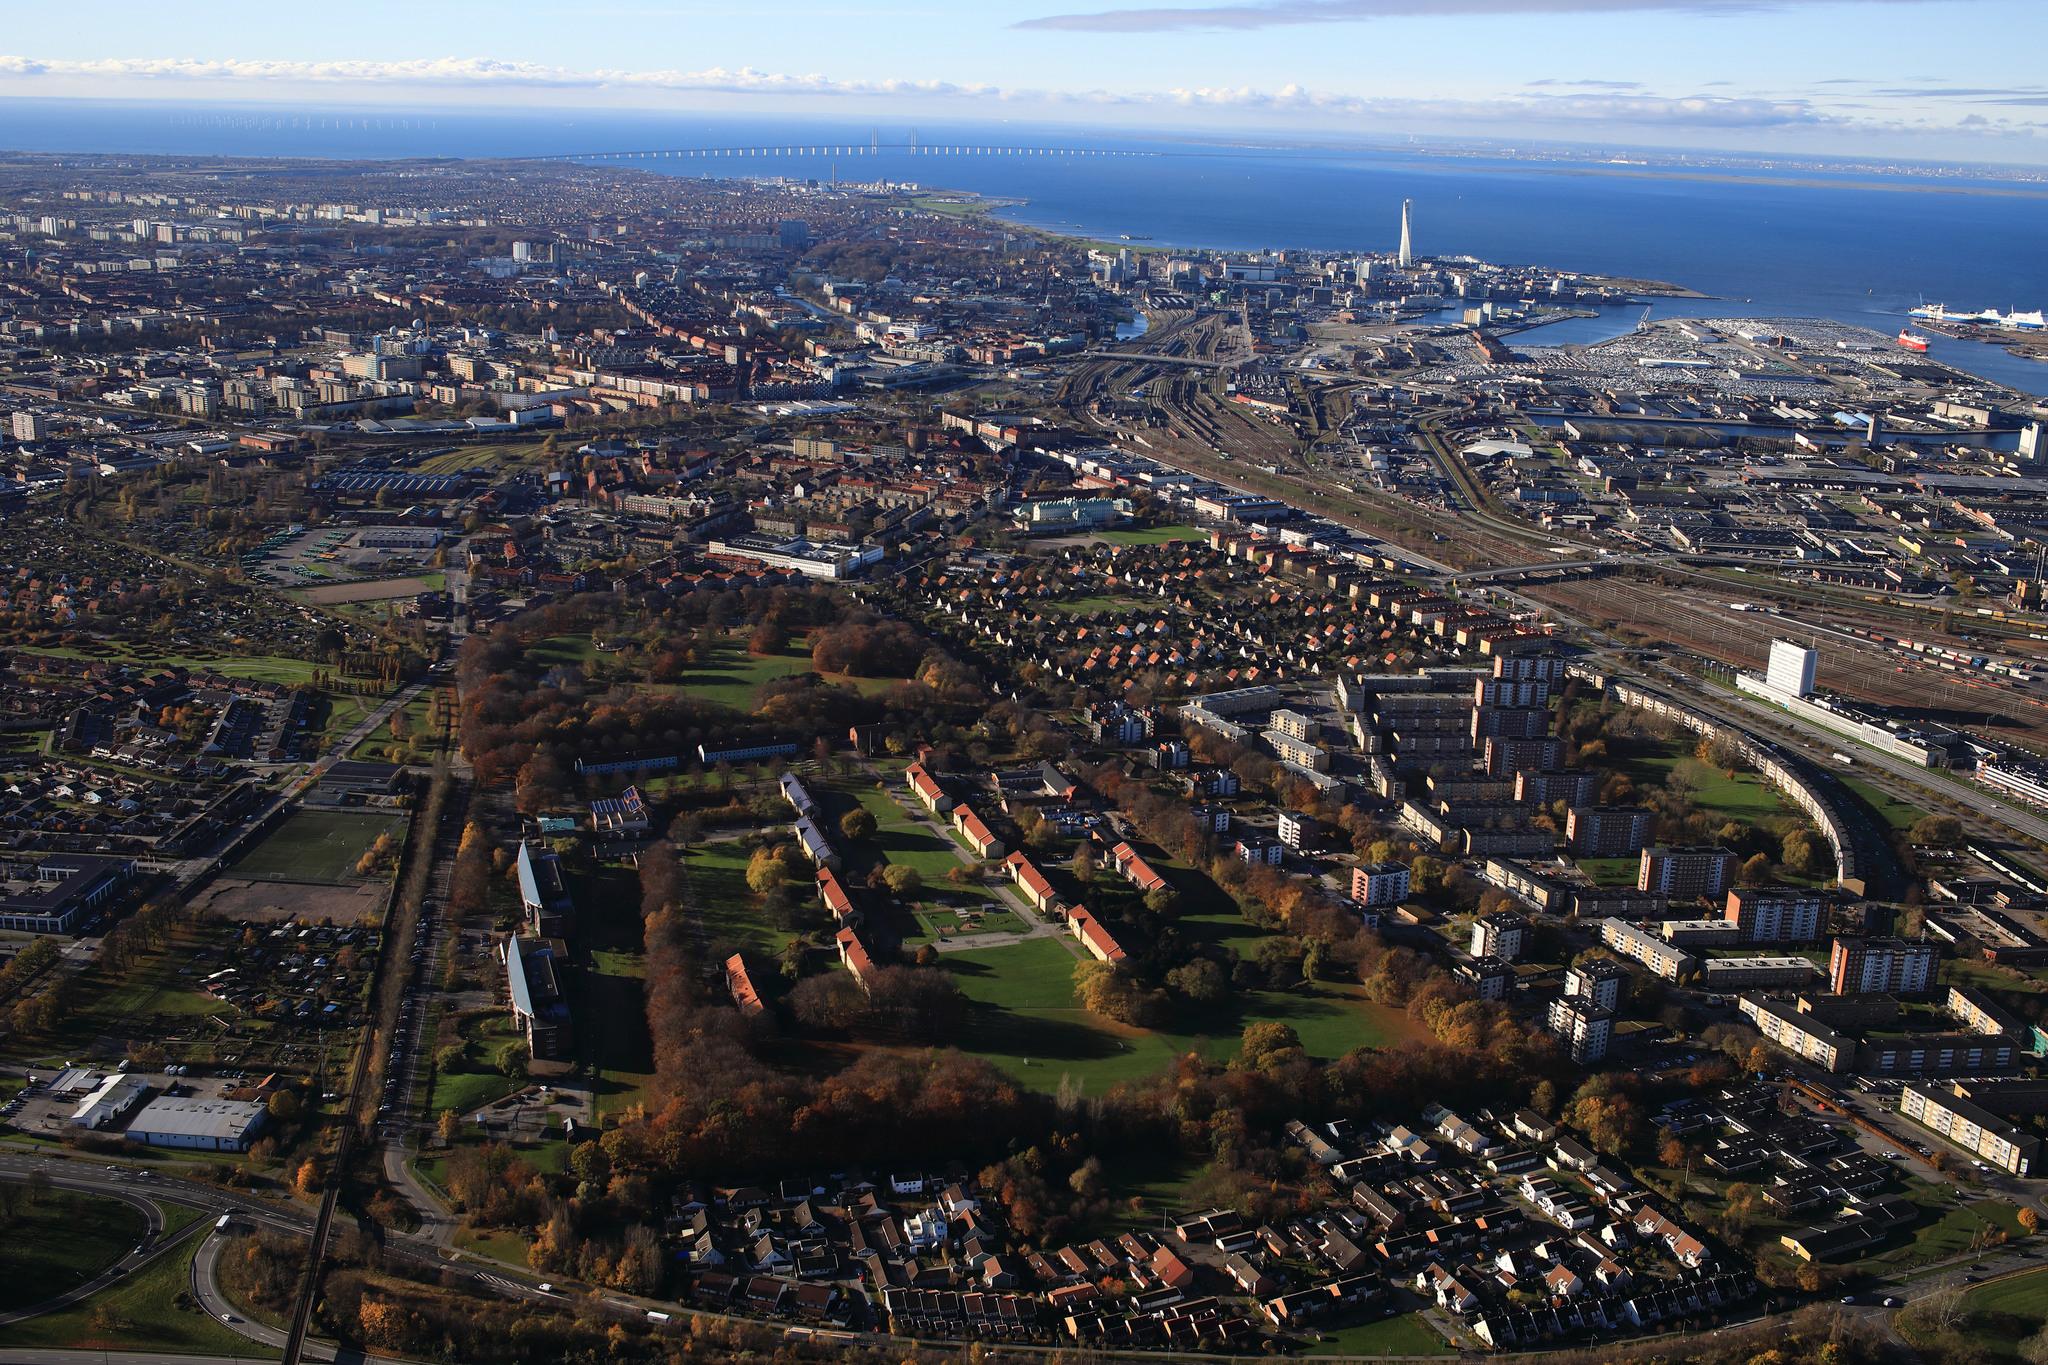 Aerial view of the city Malmö, with Sege Park in the middle.